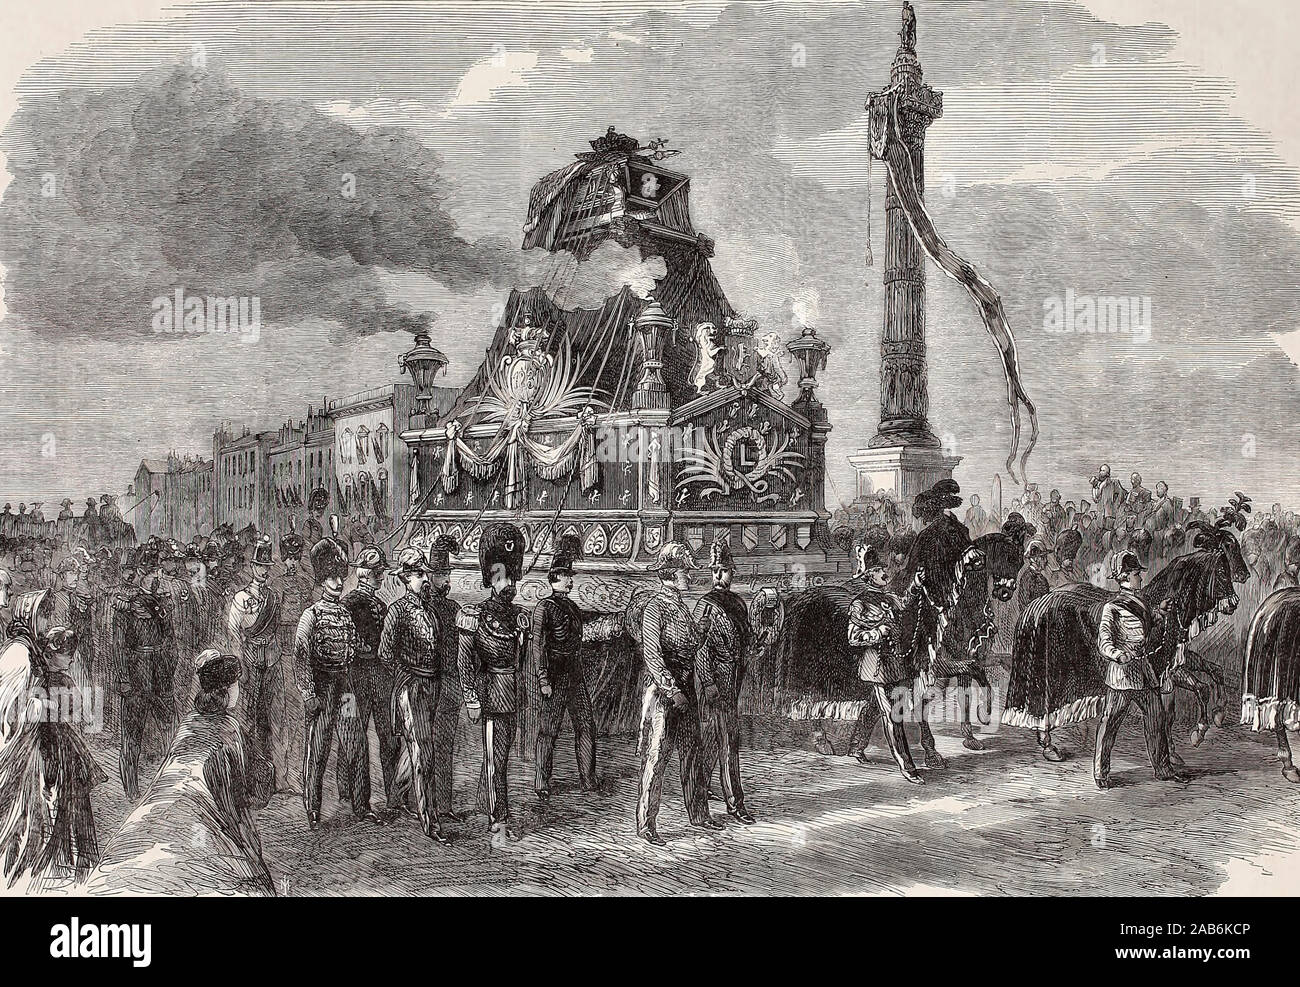 Funeral of the Late King of the Belgians, Leopold I - The Funeral Car passing the Column in the place Du Congress at Brussels, Belgium - 1865 Stock Photo